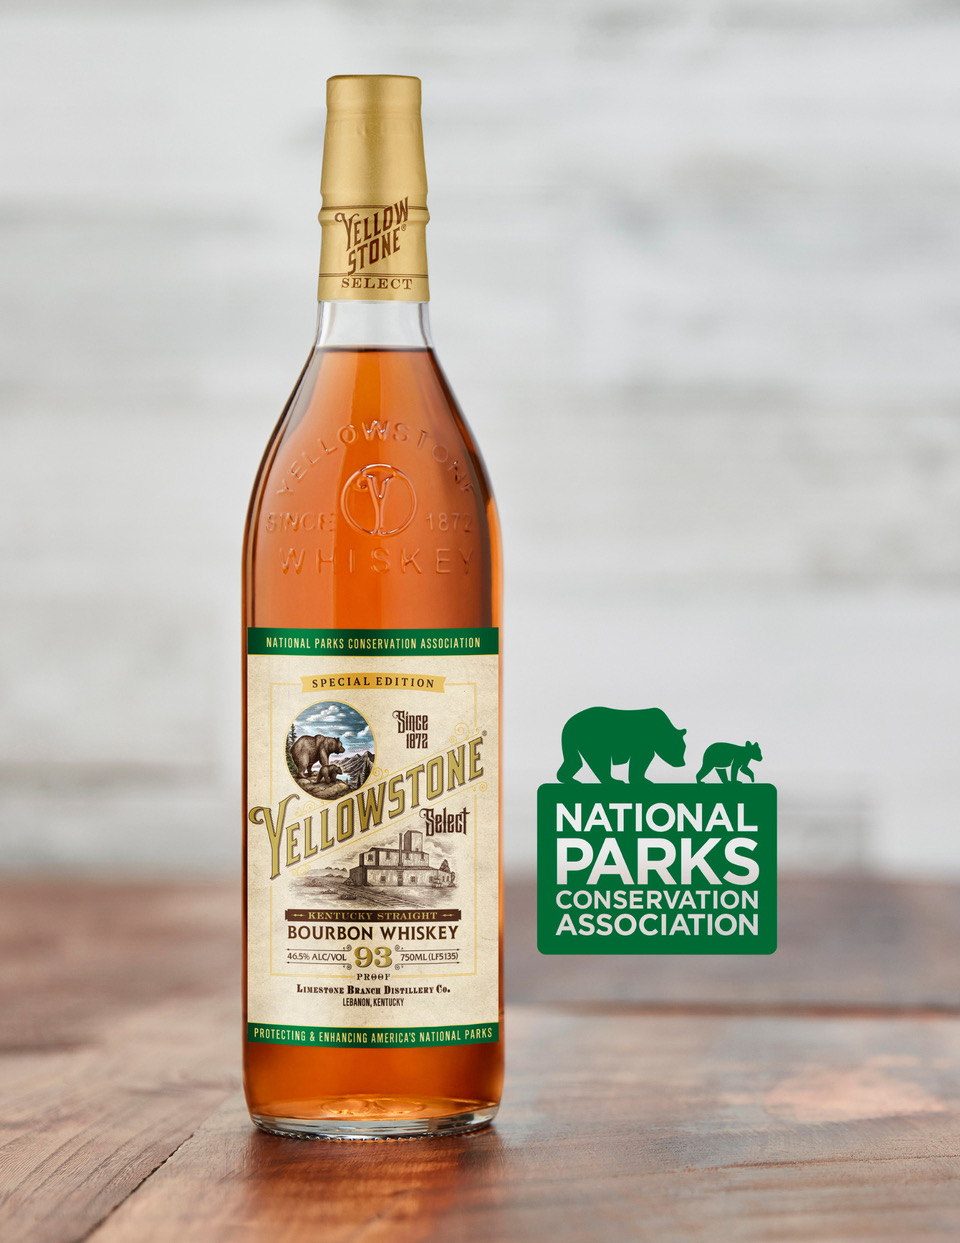 New Donation Continues Partnership Between Yellowstone Bourbon and National Parks